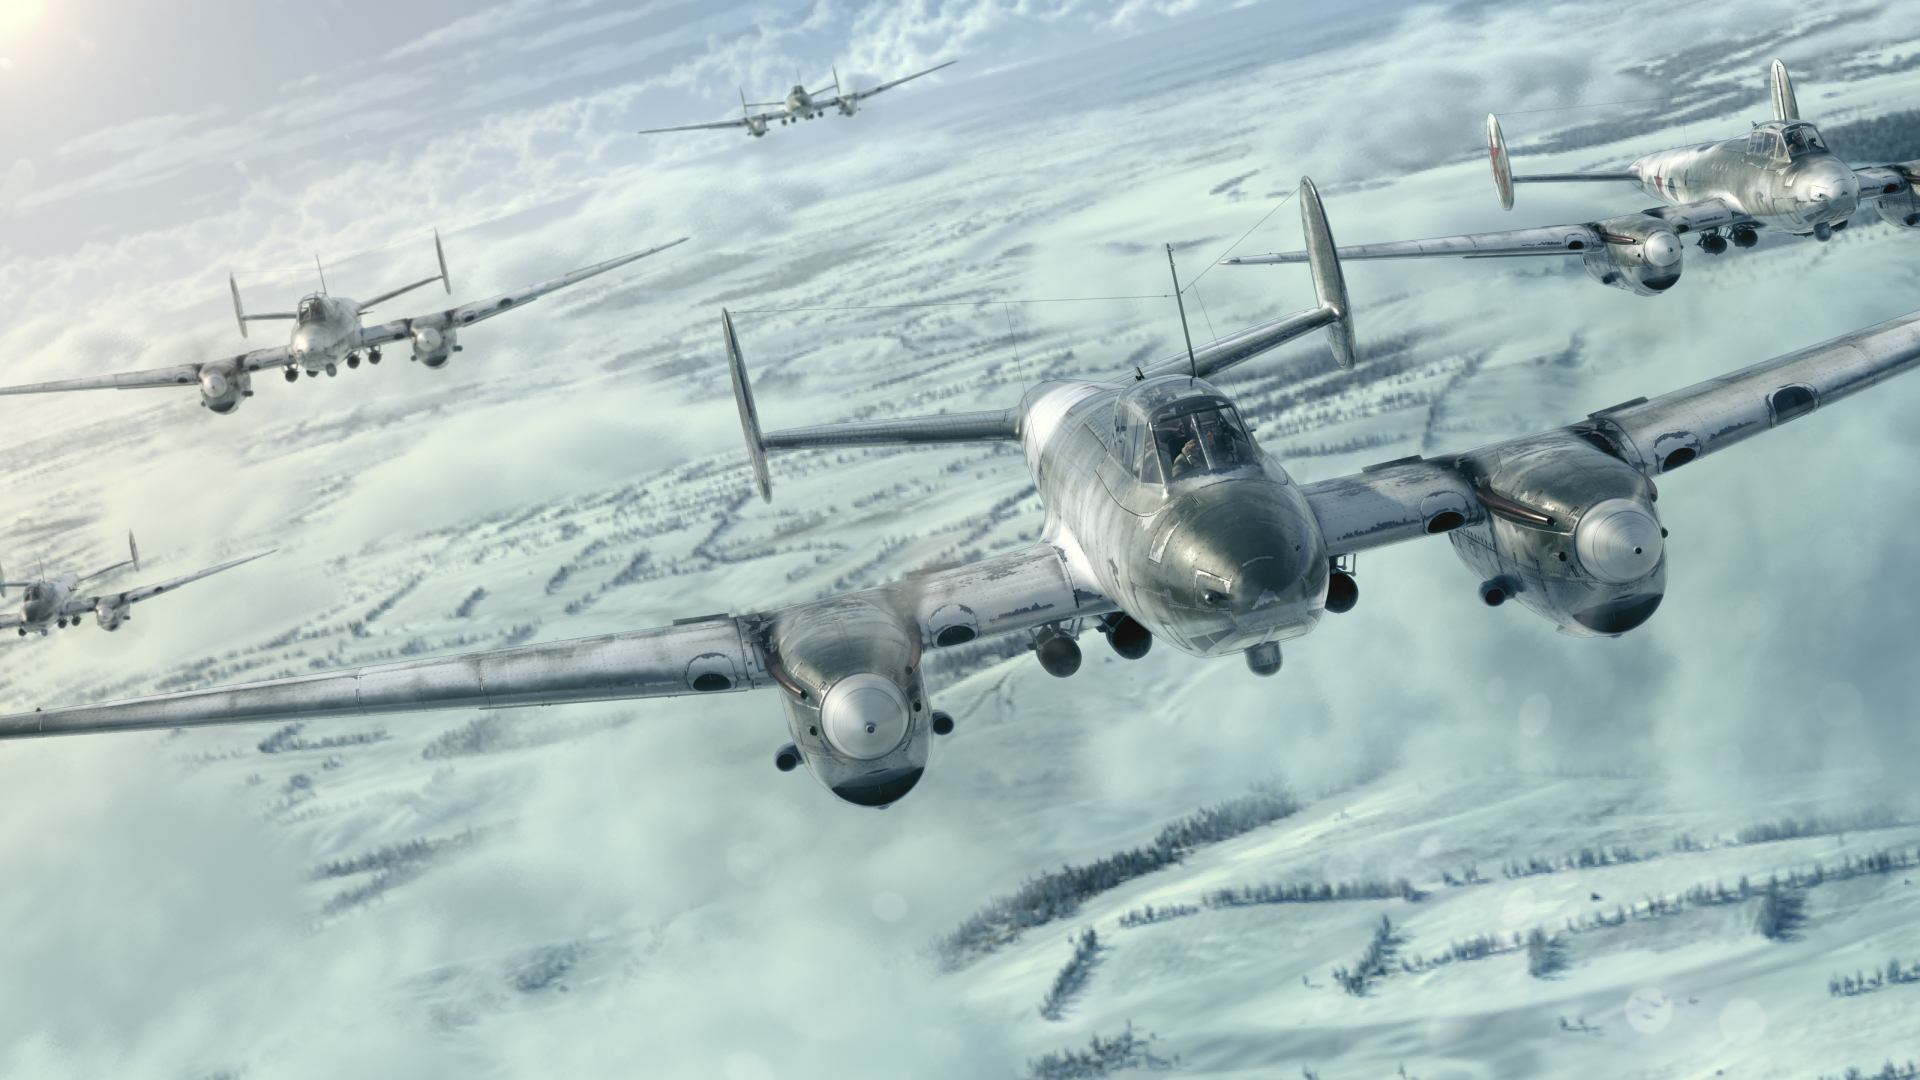 General 1920x1080 World War II aircraft airplane military military aircraft war Russian USSR Petlyakov Pe-2 "Peshka" Bomber Dive bomber winter Stalingrad military vehicle vehicle artwork Soviet Air Forces snow covered snow clouds flying Russian/Soviet aircraft